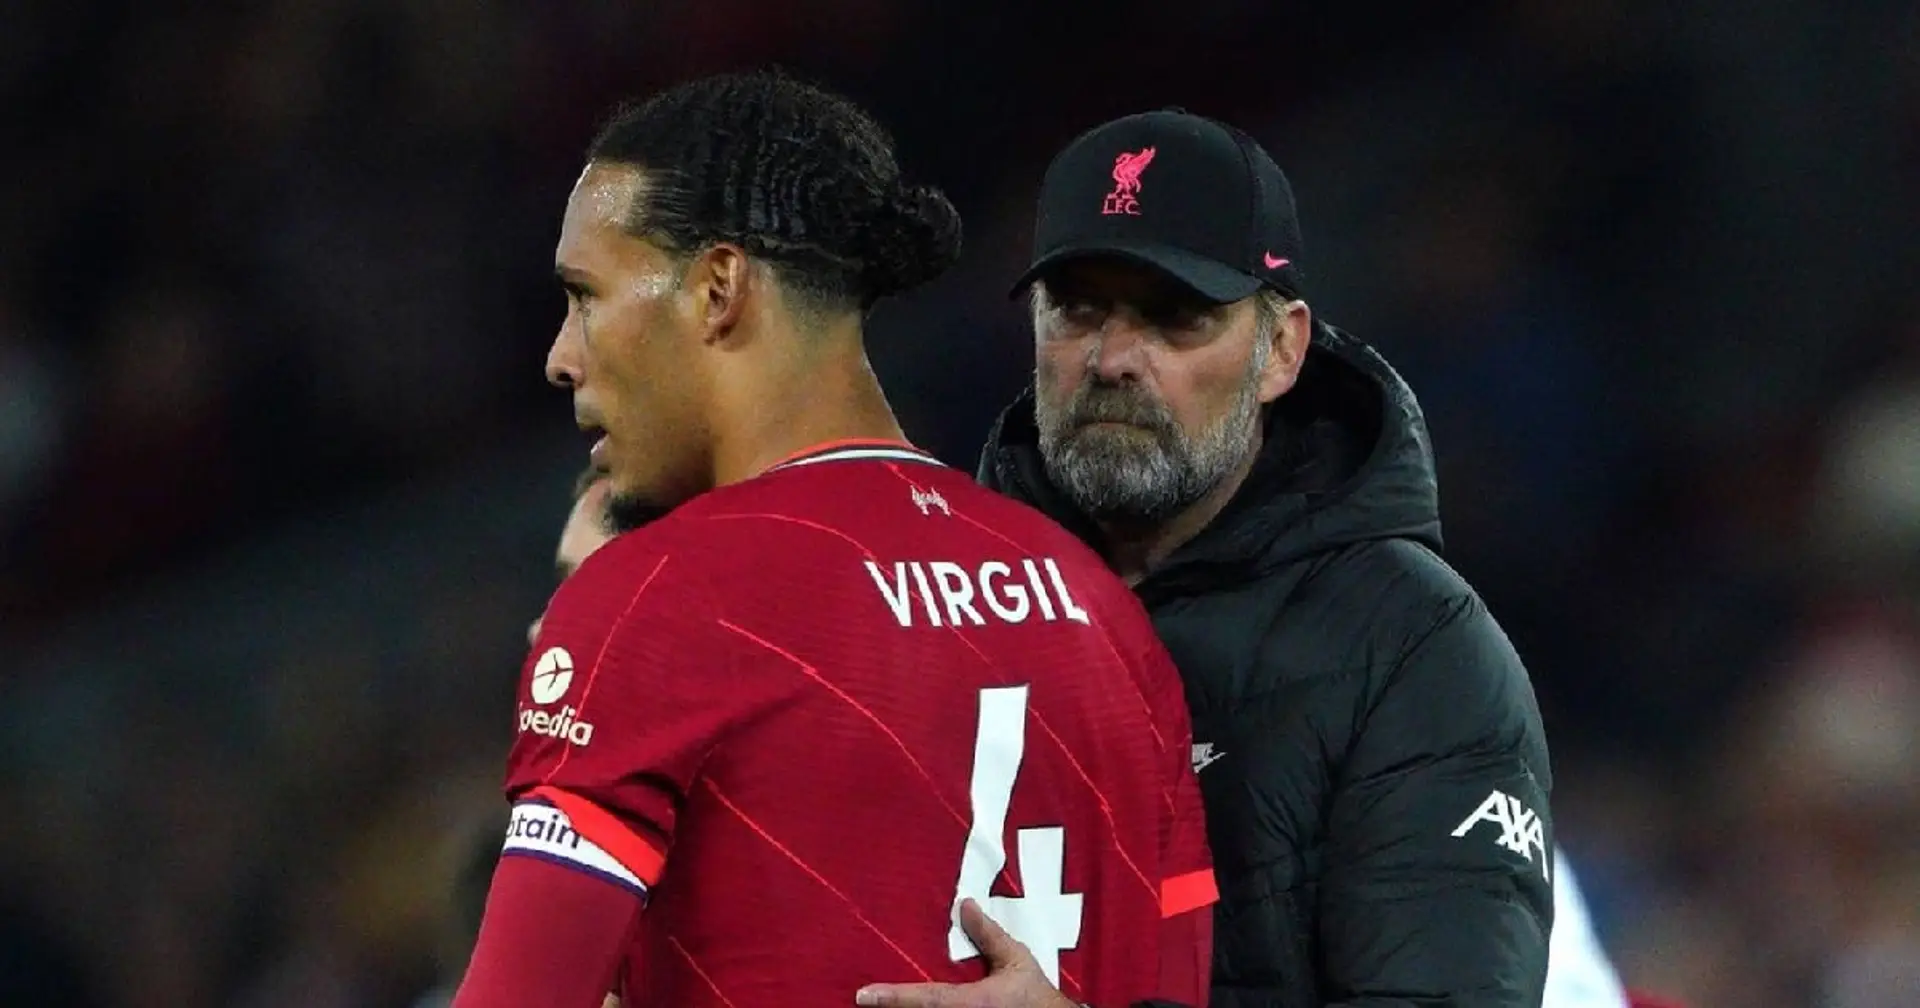 'That will be the case now': Van Dijk makes admission about Klopp's exit